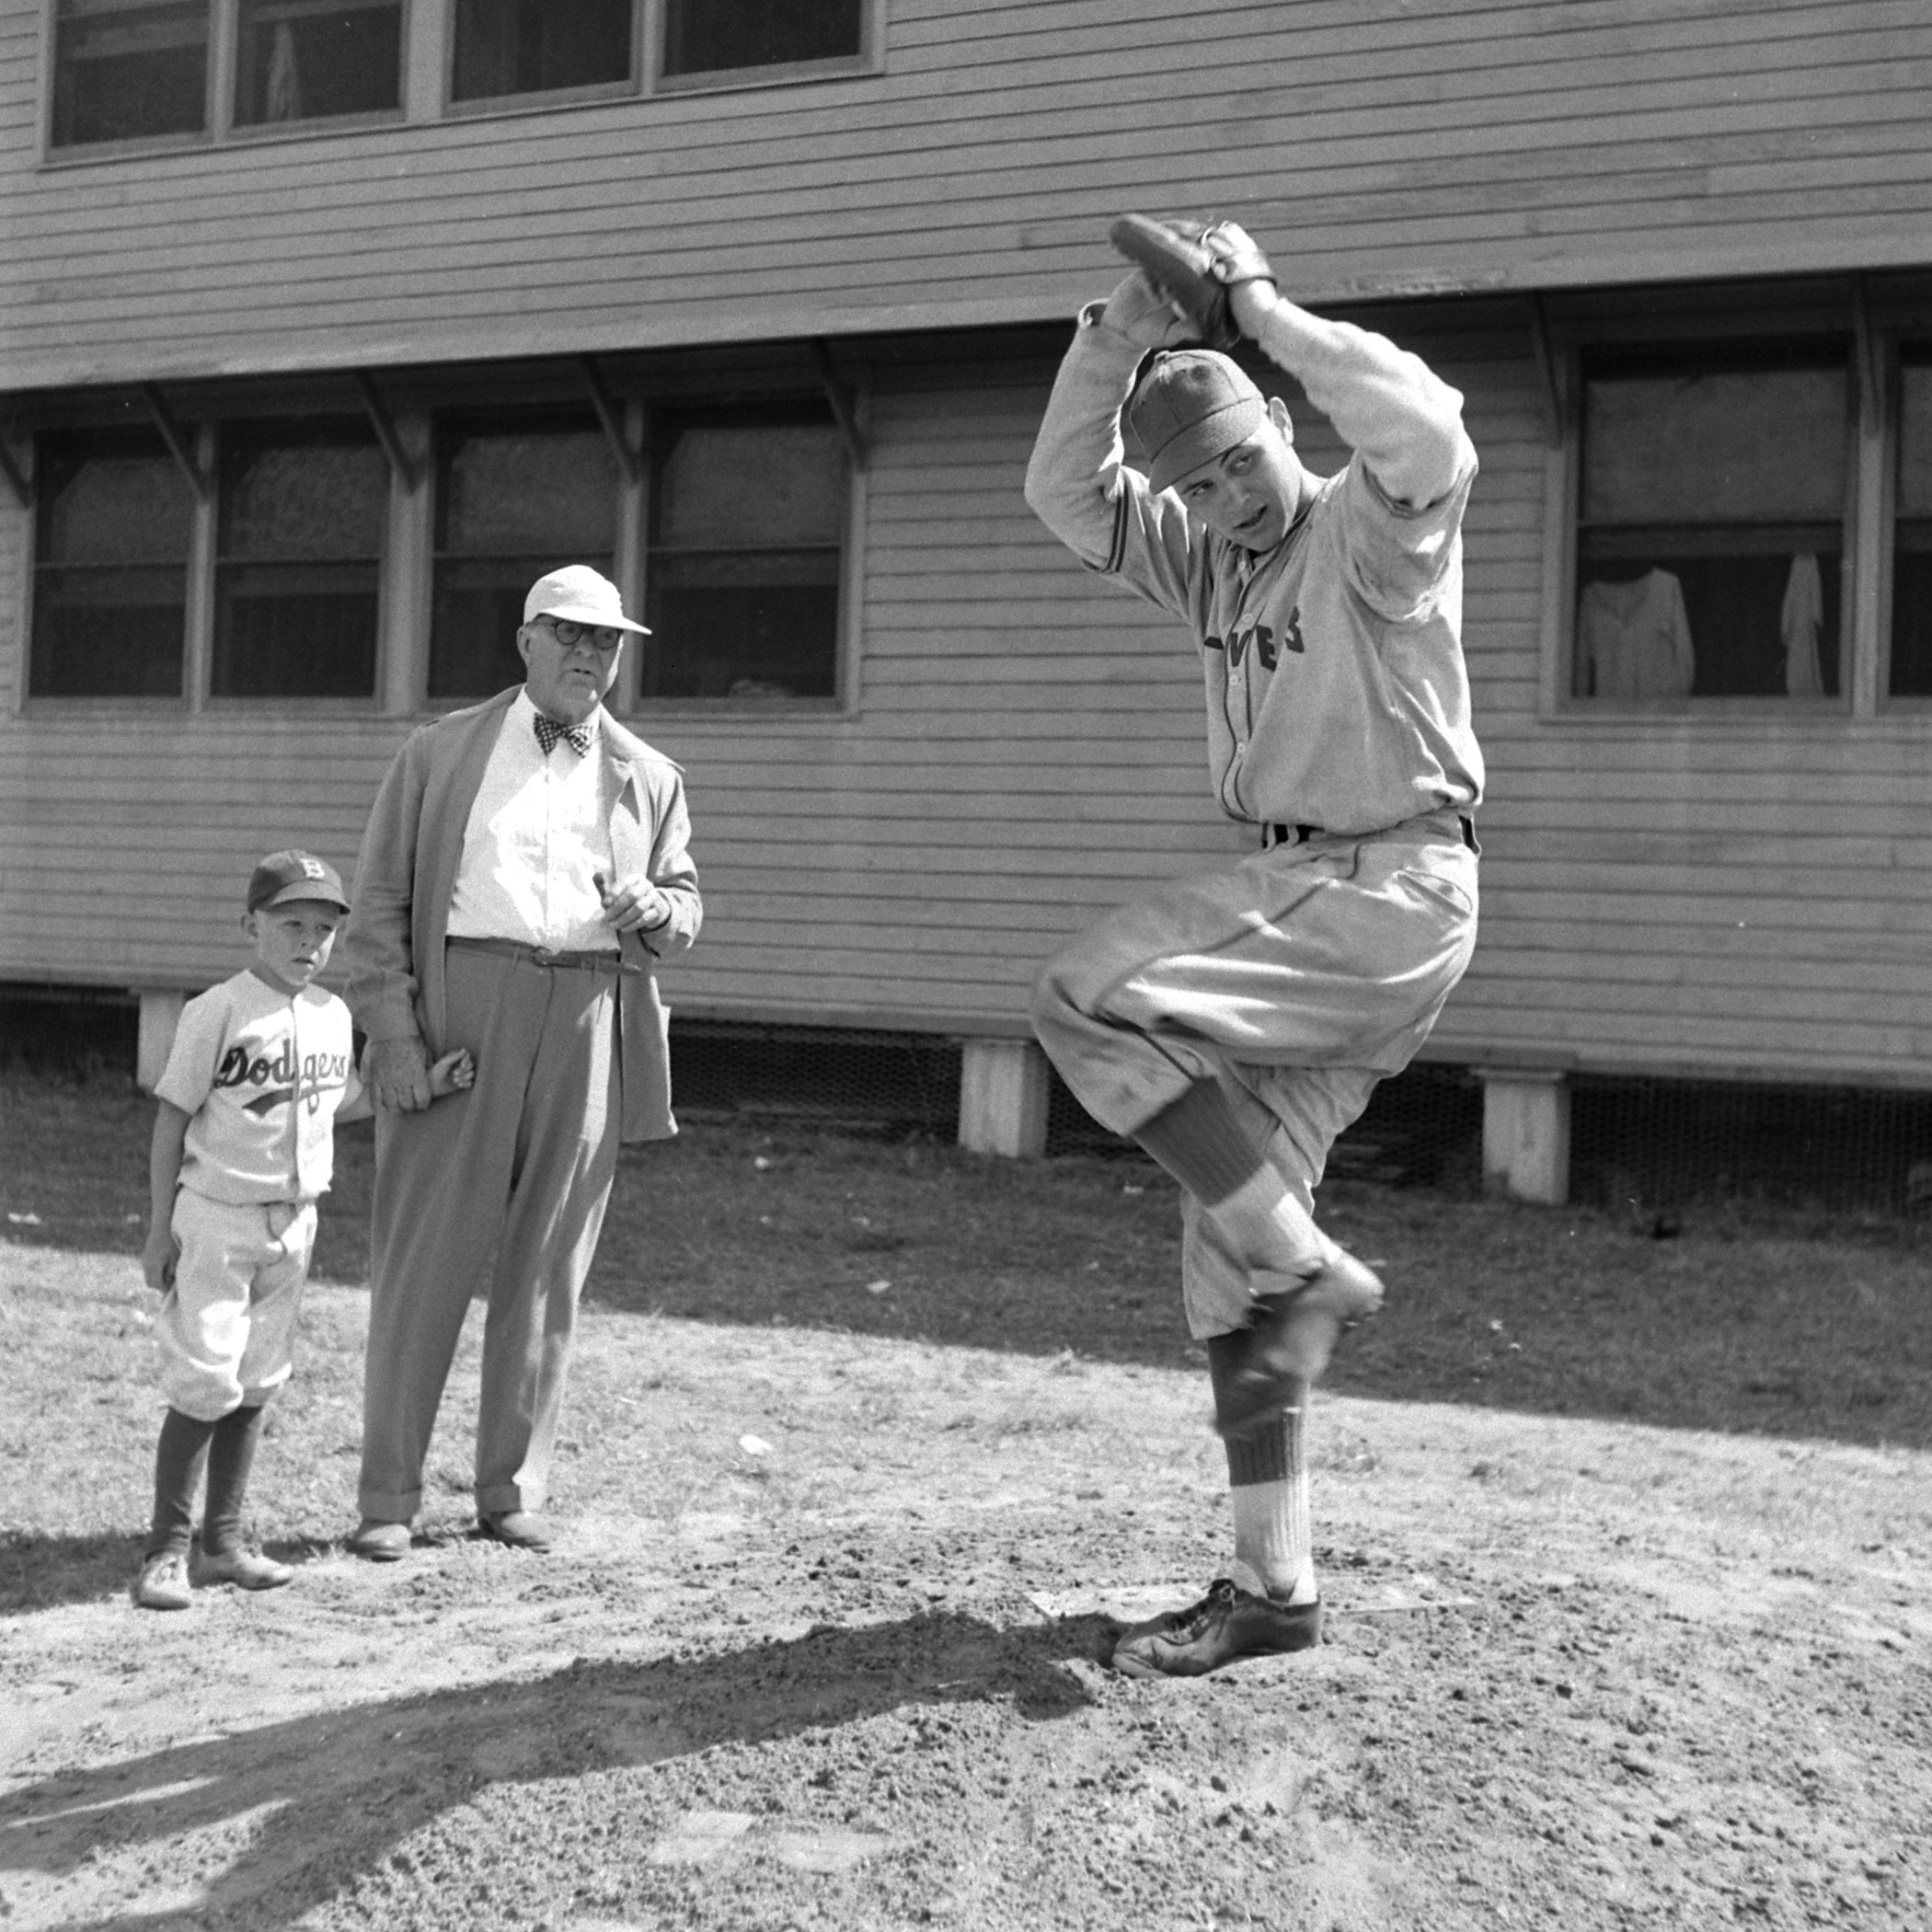 The great Dodgers general manager Branch Rickey and his grandson watch a pitcher go through his wind-up, Vero Beach, Fla., 1948.